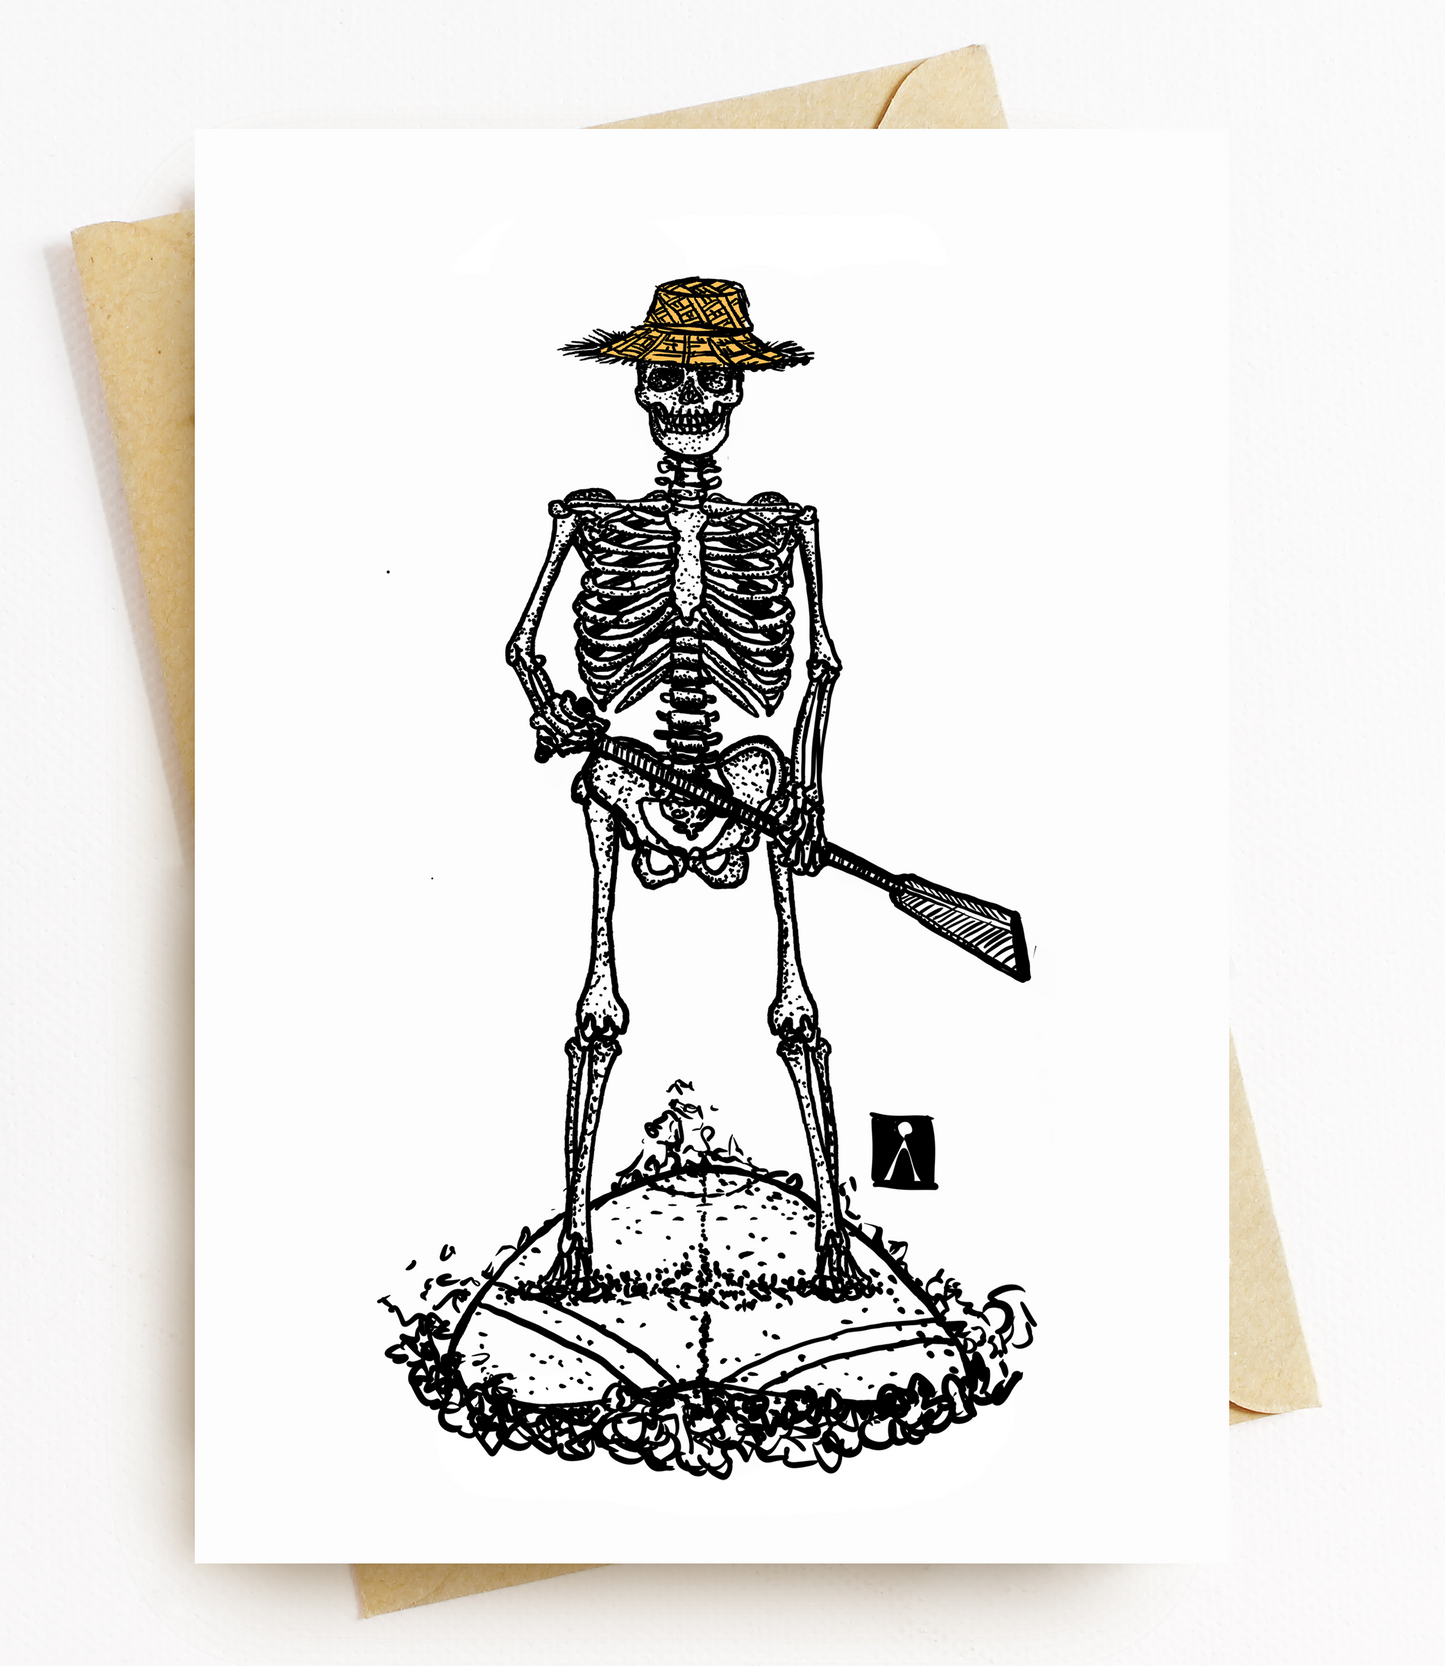 BellavanceInk: Greeting Card With Skeleton On Their Paddle Board 5 x 7 Inches